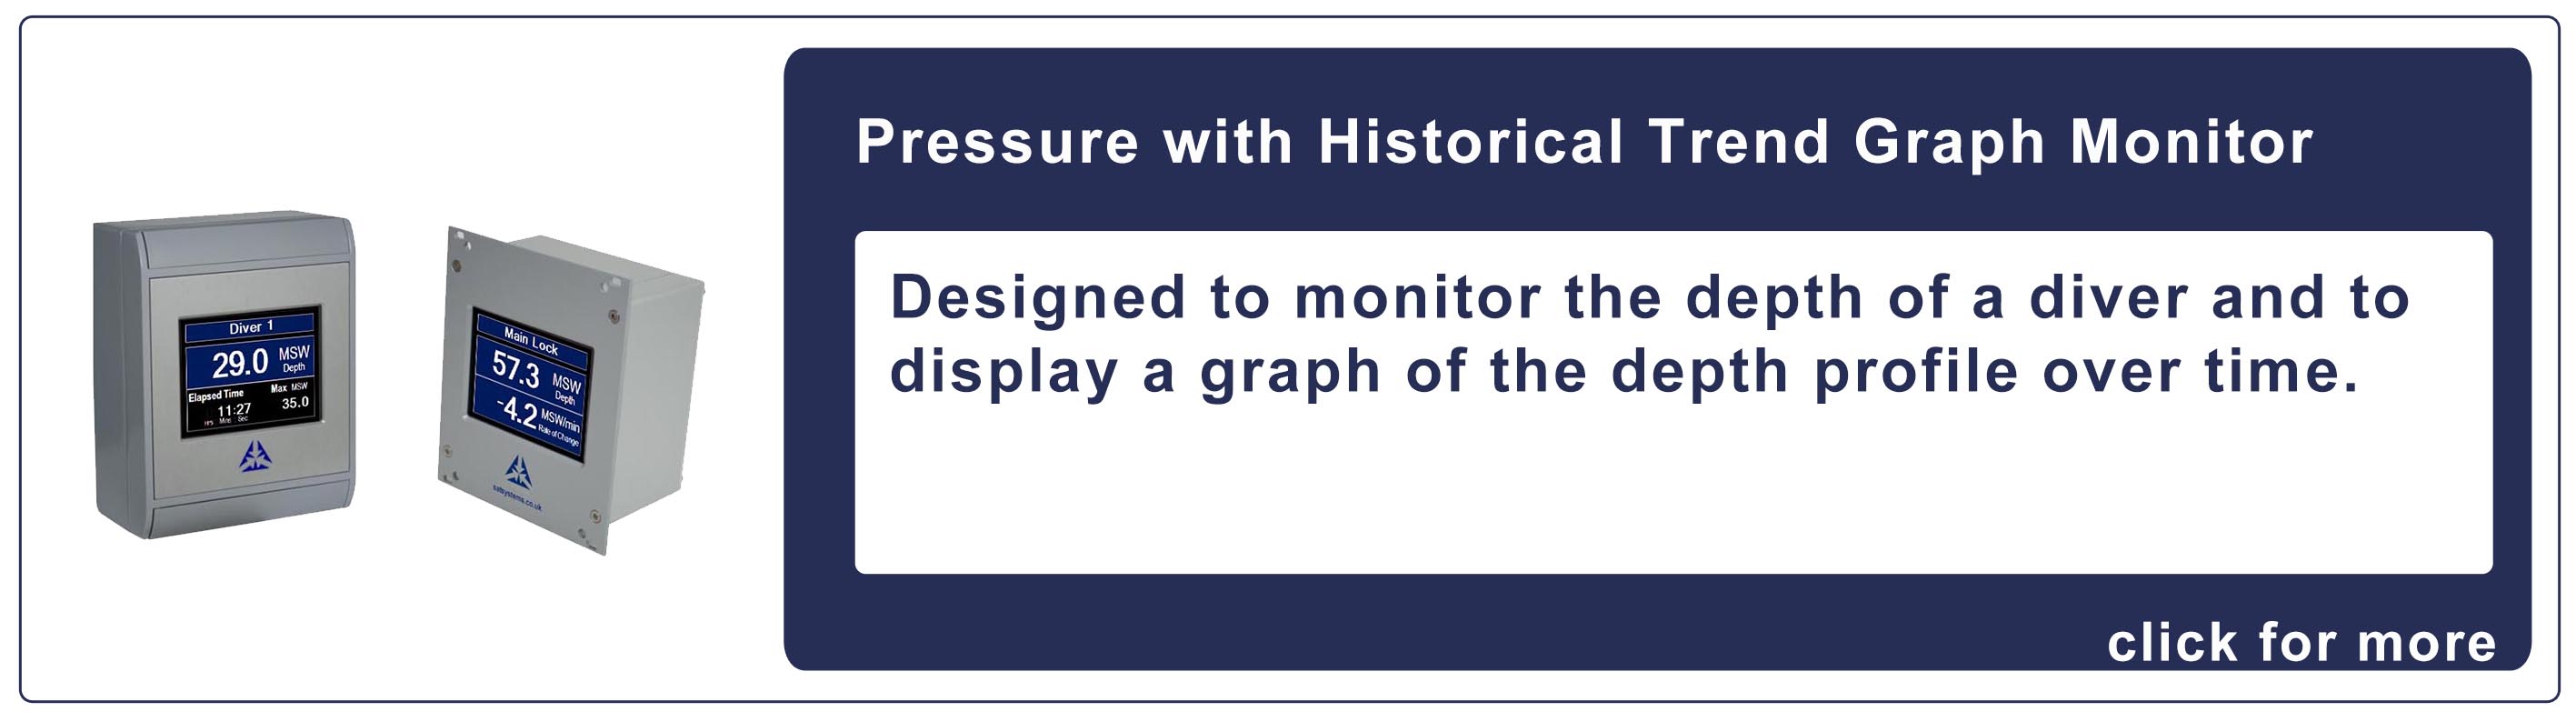 Pressure-with-Historical-Trend-Graph-Monitor